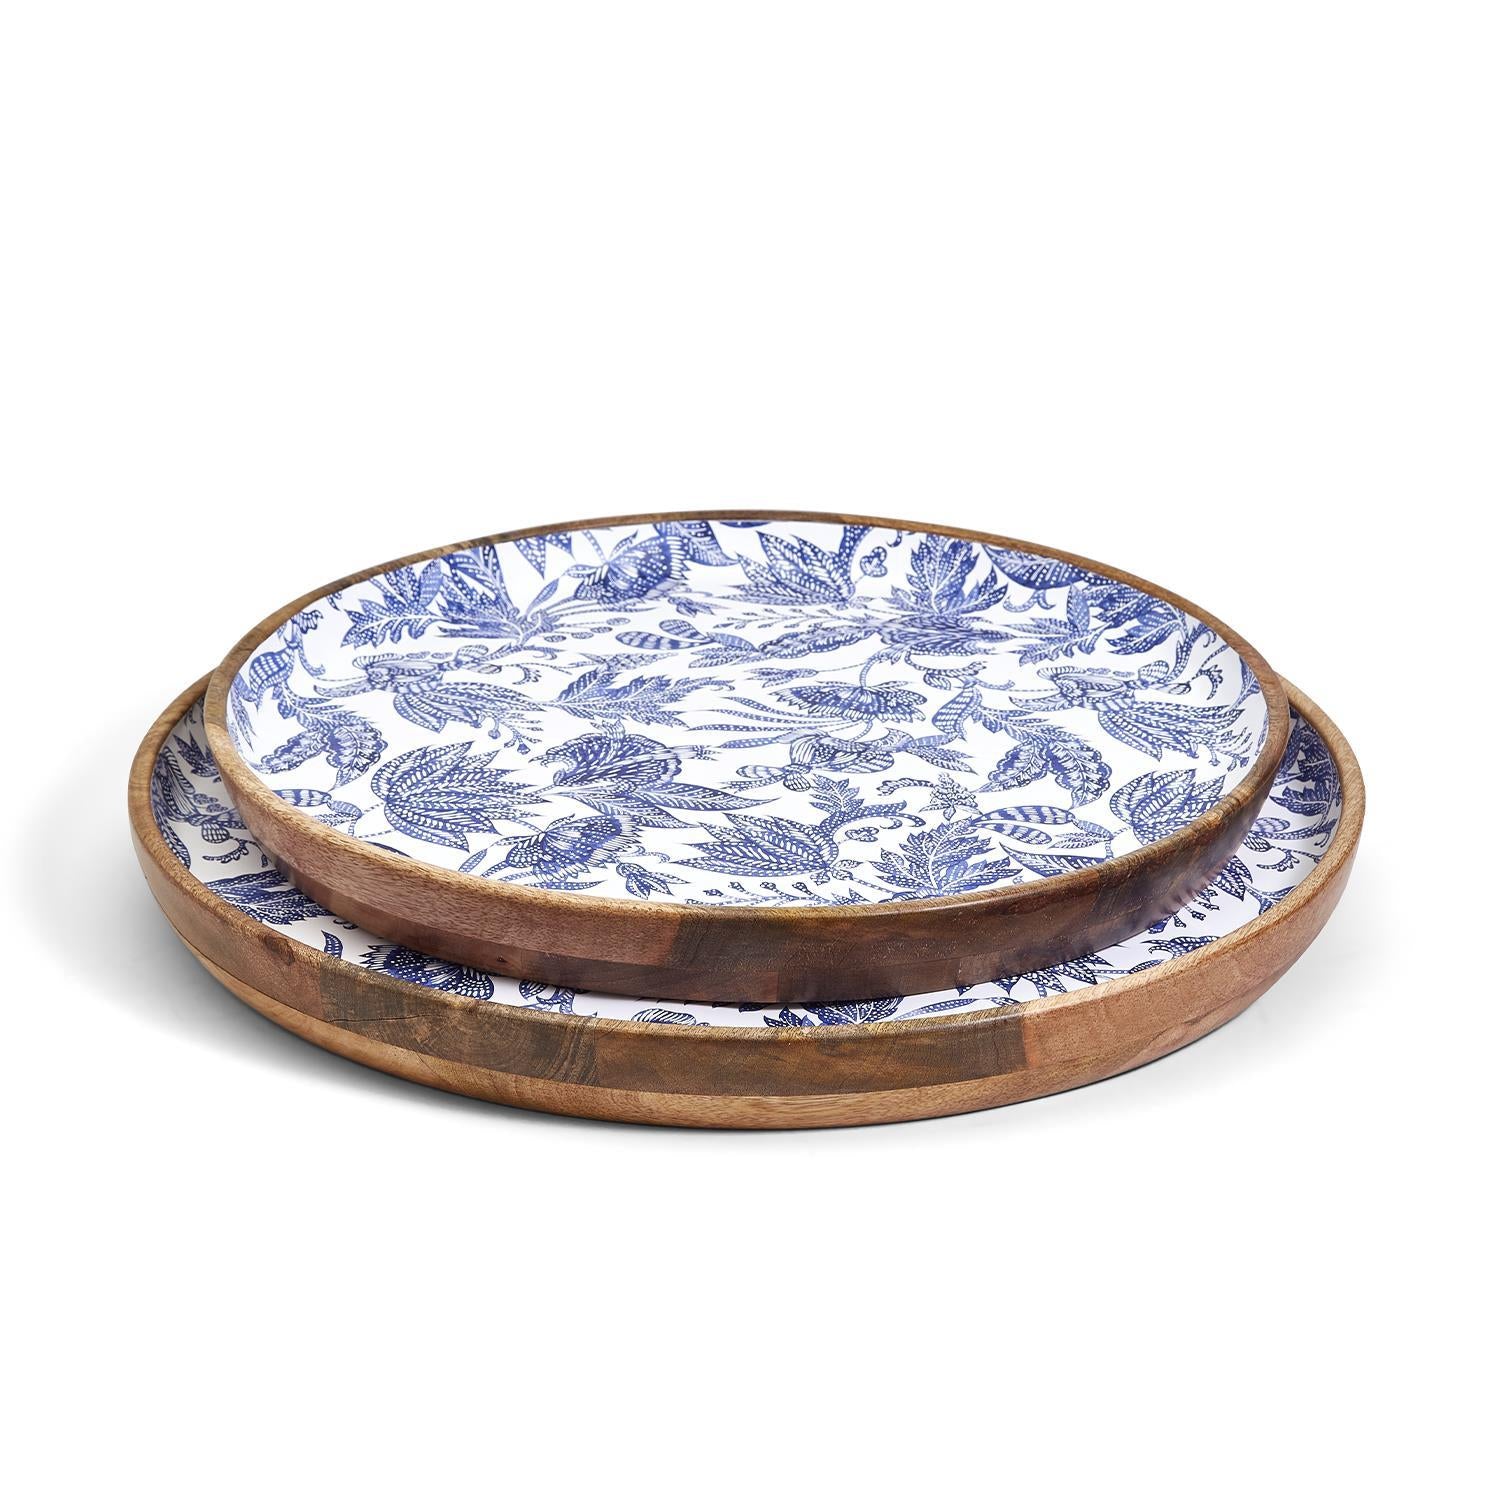 Two's Company Blue Batik S/2 Hand-Crafted Wood Round Trays